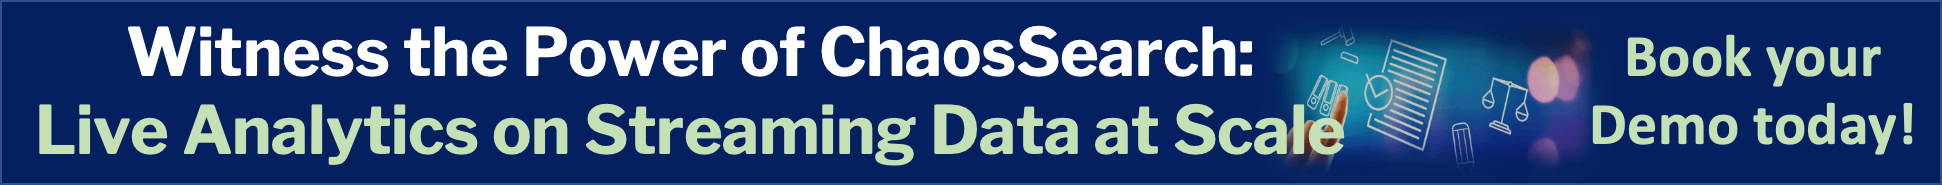 Witness the Power of ChaosSearch: Live Analytics on Streaming Data at Scale. Book your Demo today!